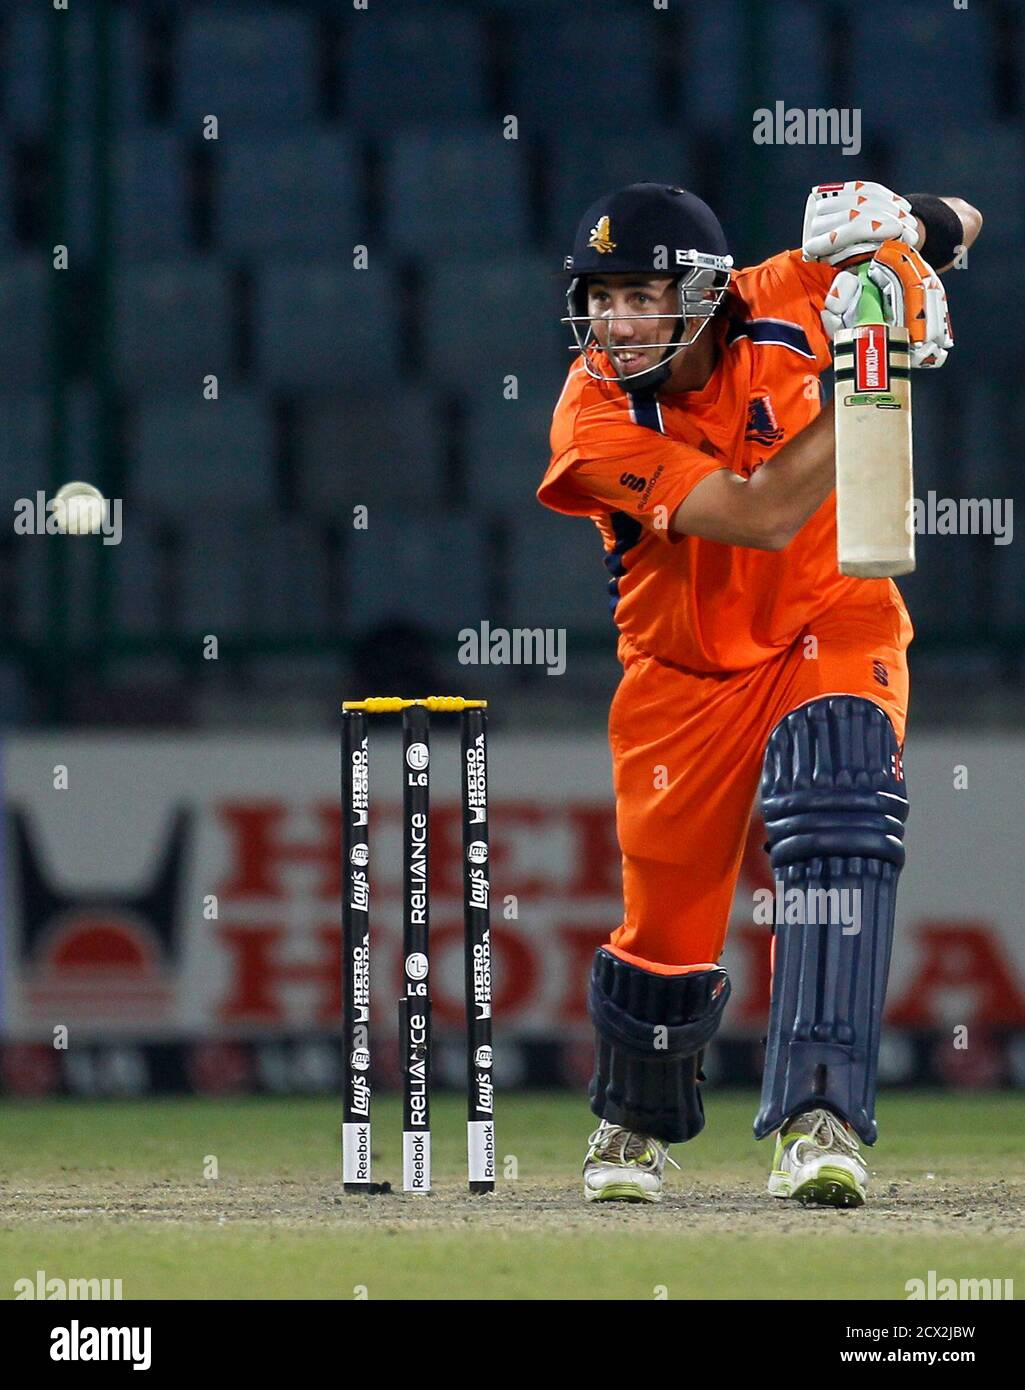 Tom Cooper plays a shot during their ICC Cricket World group B match against the West in New Delhi February 28, 2011. REUTERS/Adnan Abidi (INDIA - Tags: SPORT CRICKET